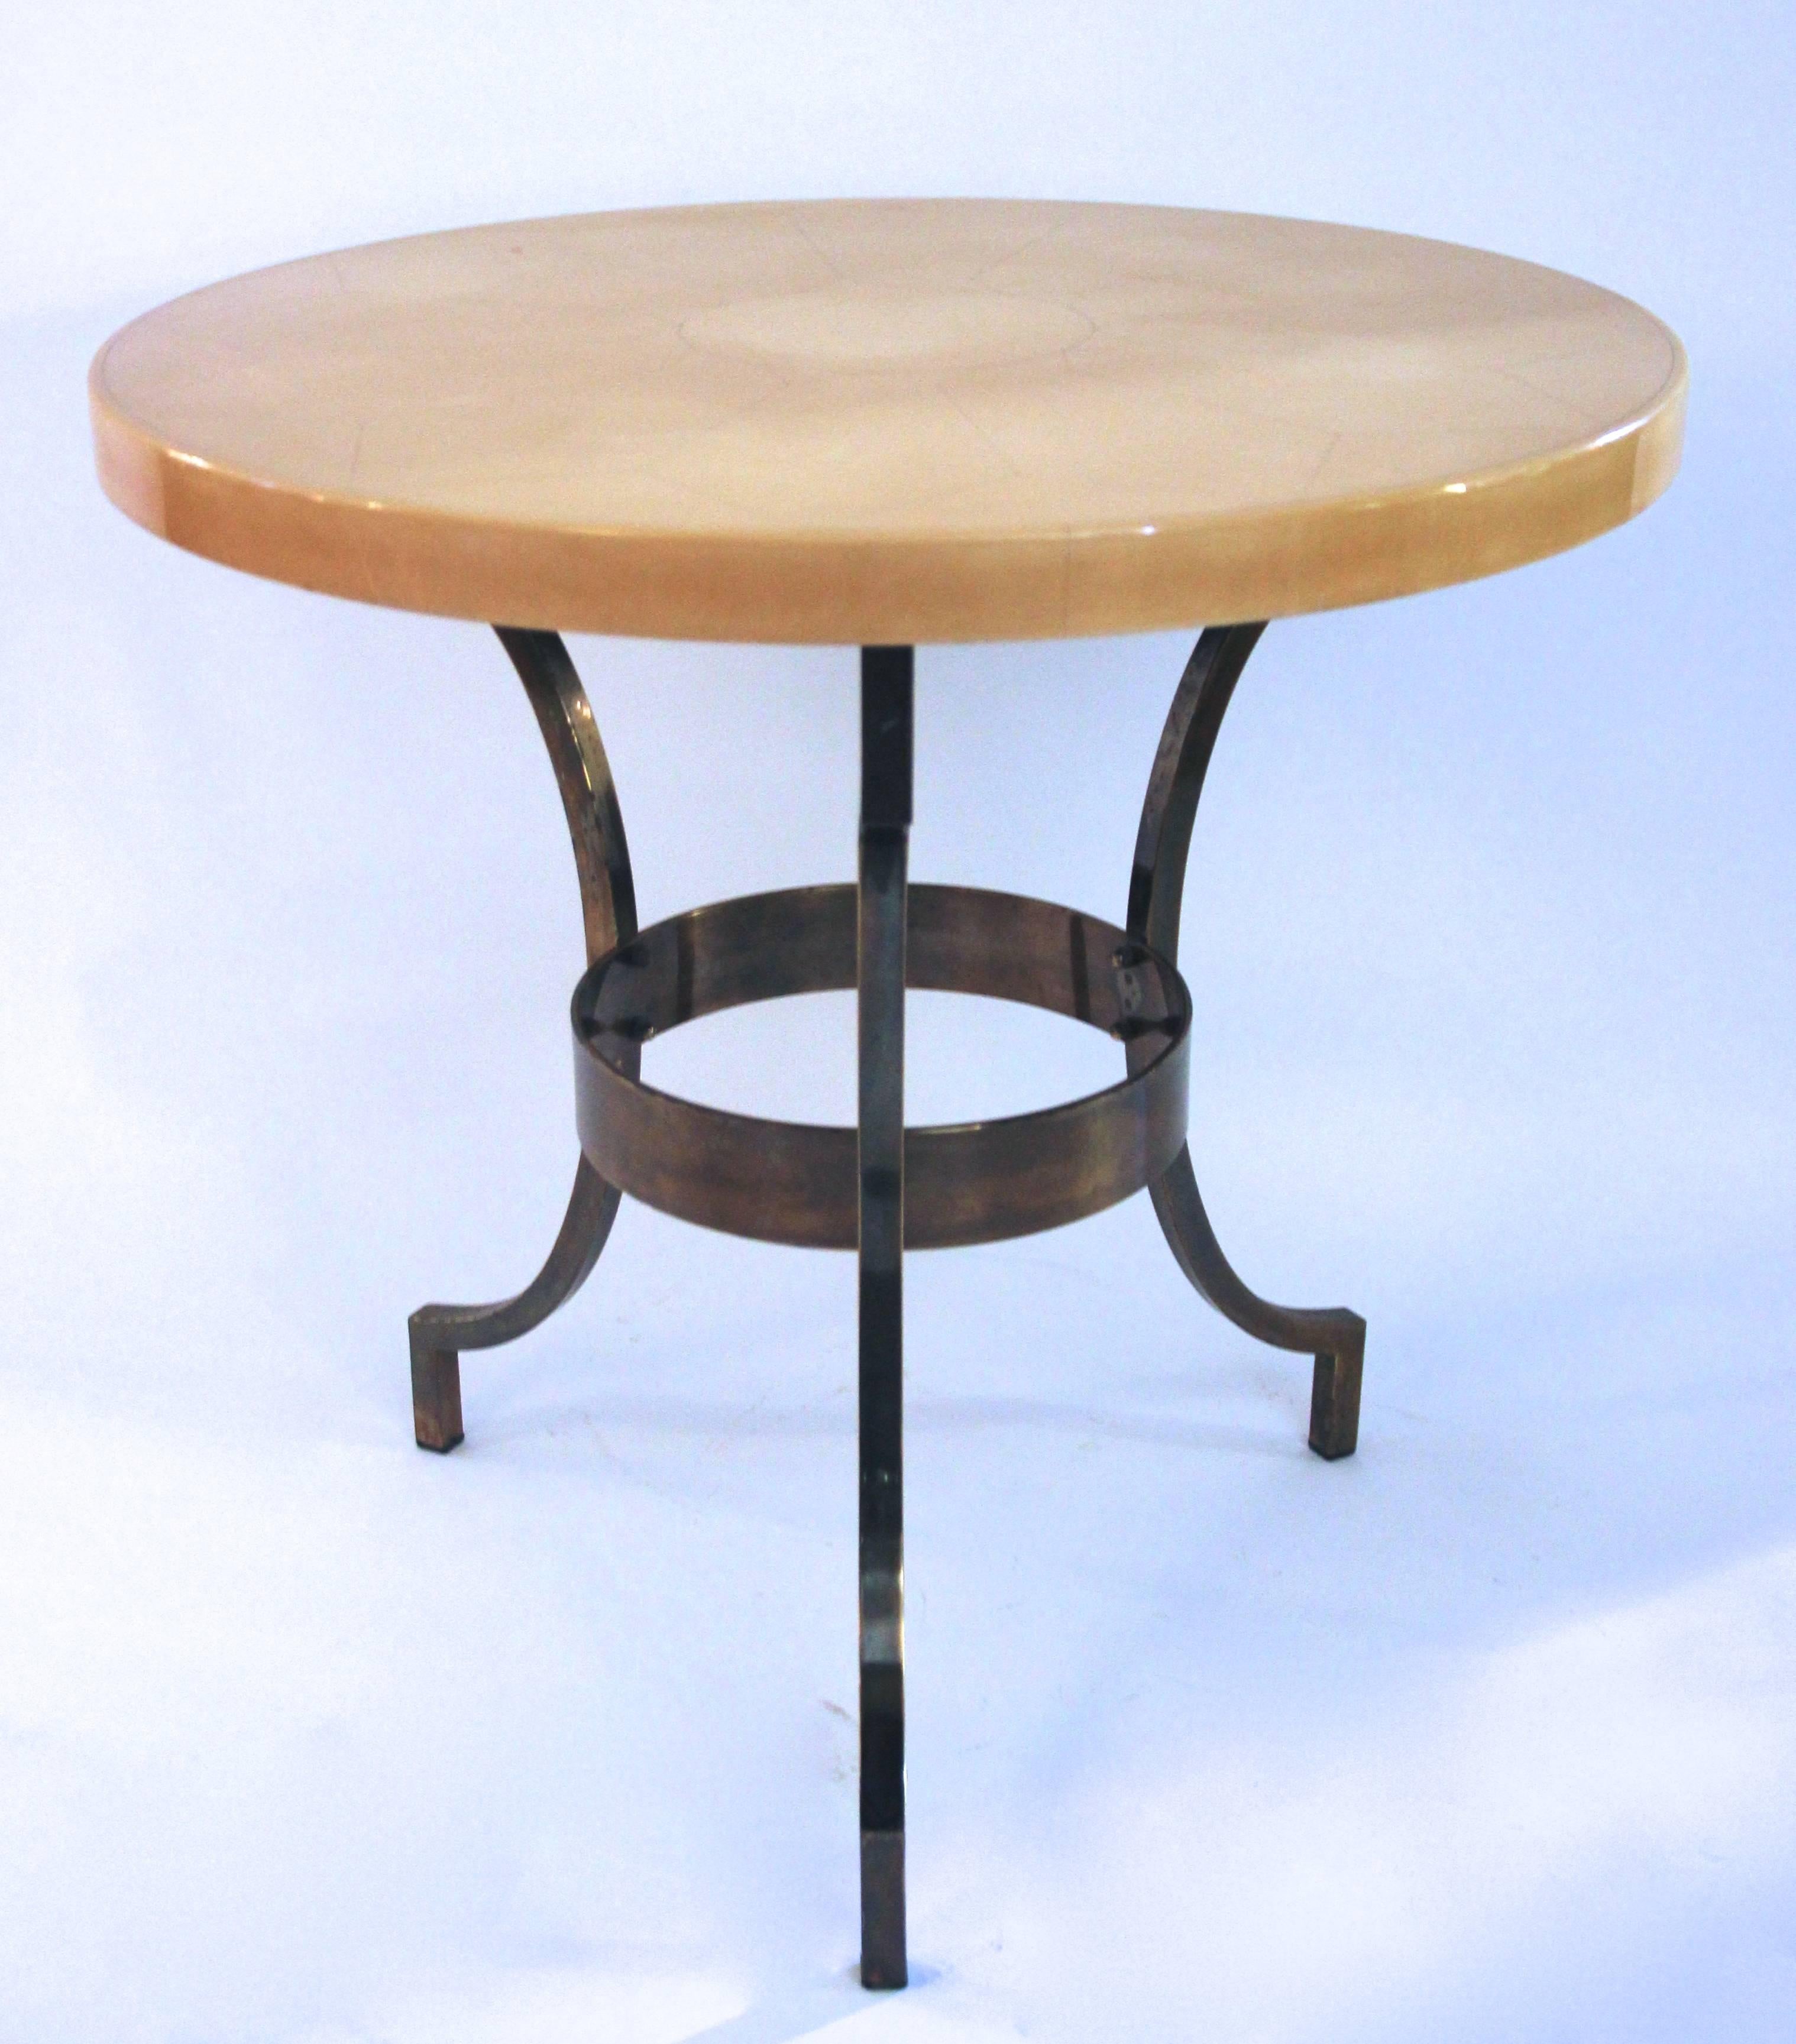 Maison Jansen, pedestal table.
Lacquered wood and iron base,
circa 1970, France.
Measures: Height: 70 cm, diameter: 67 cm.